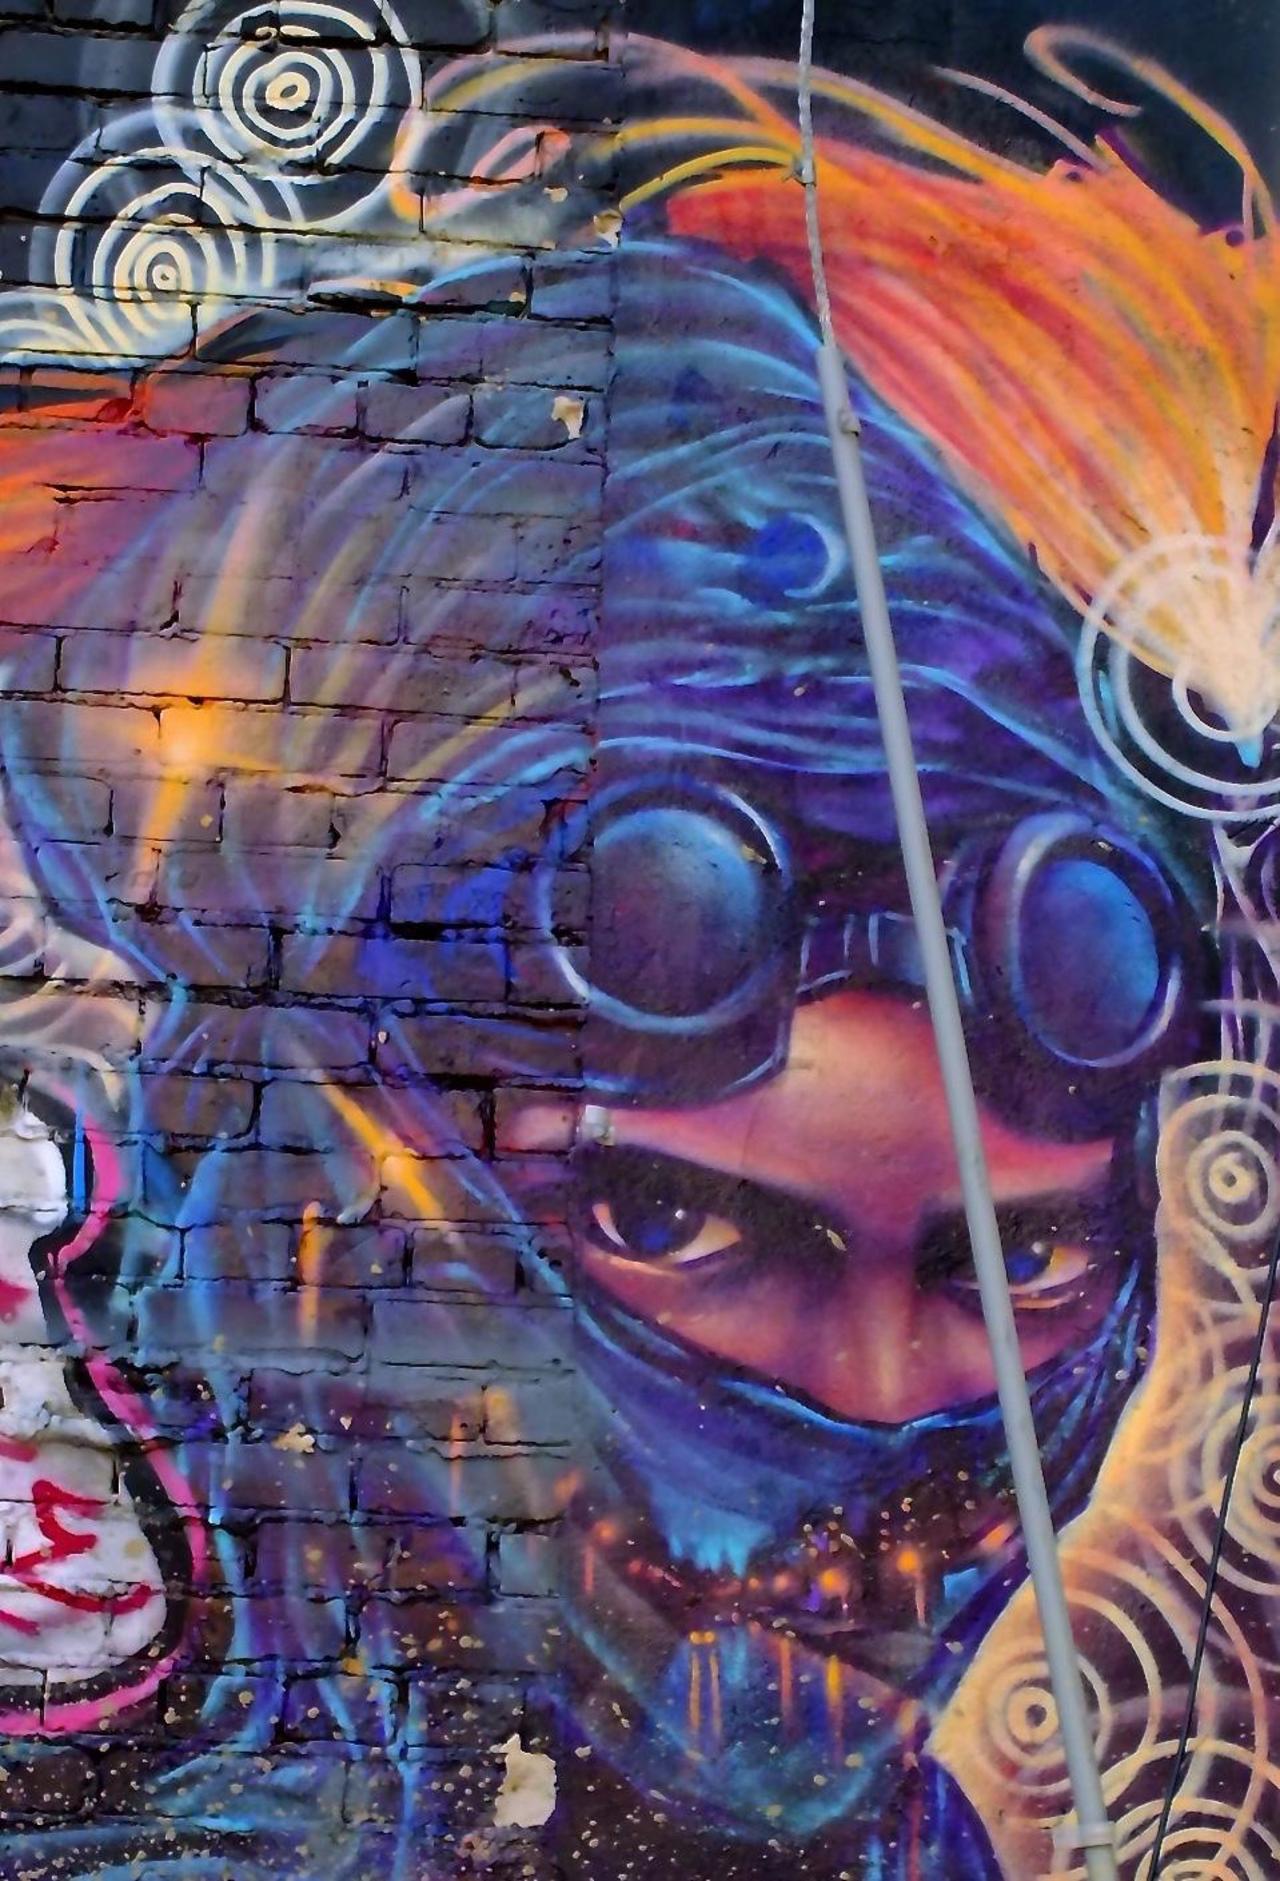 Out here, everything hurts. #MadMax #streetart #graffiti #art #colour #design #streetphotography http://t.co/1XOvsdN8pc